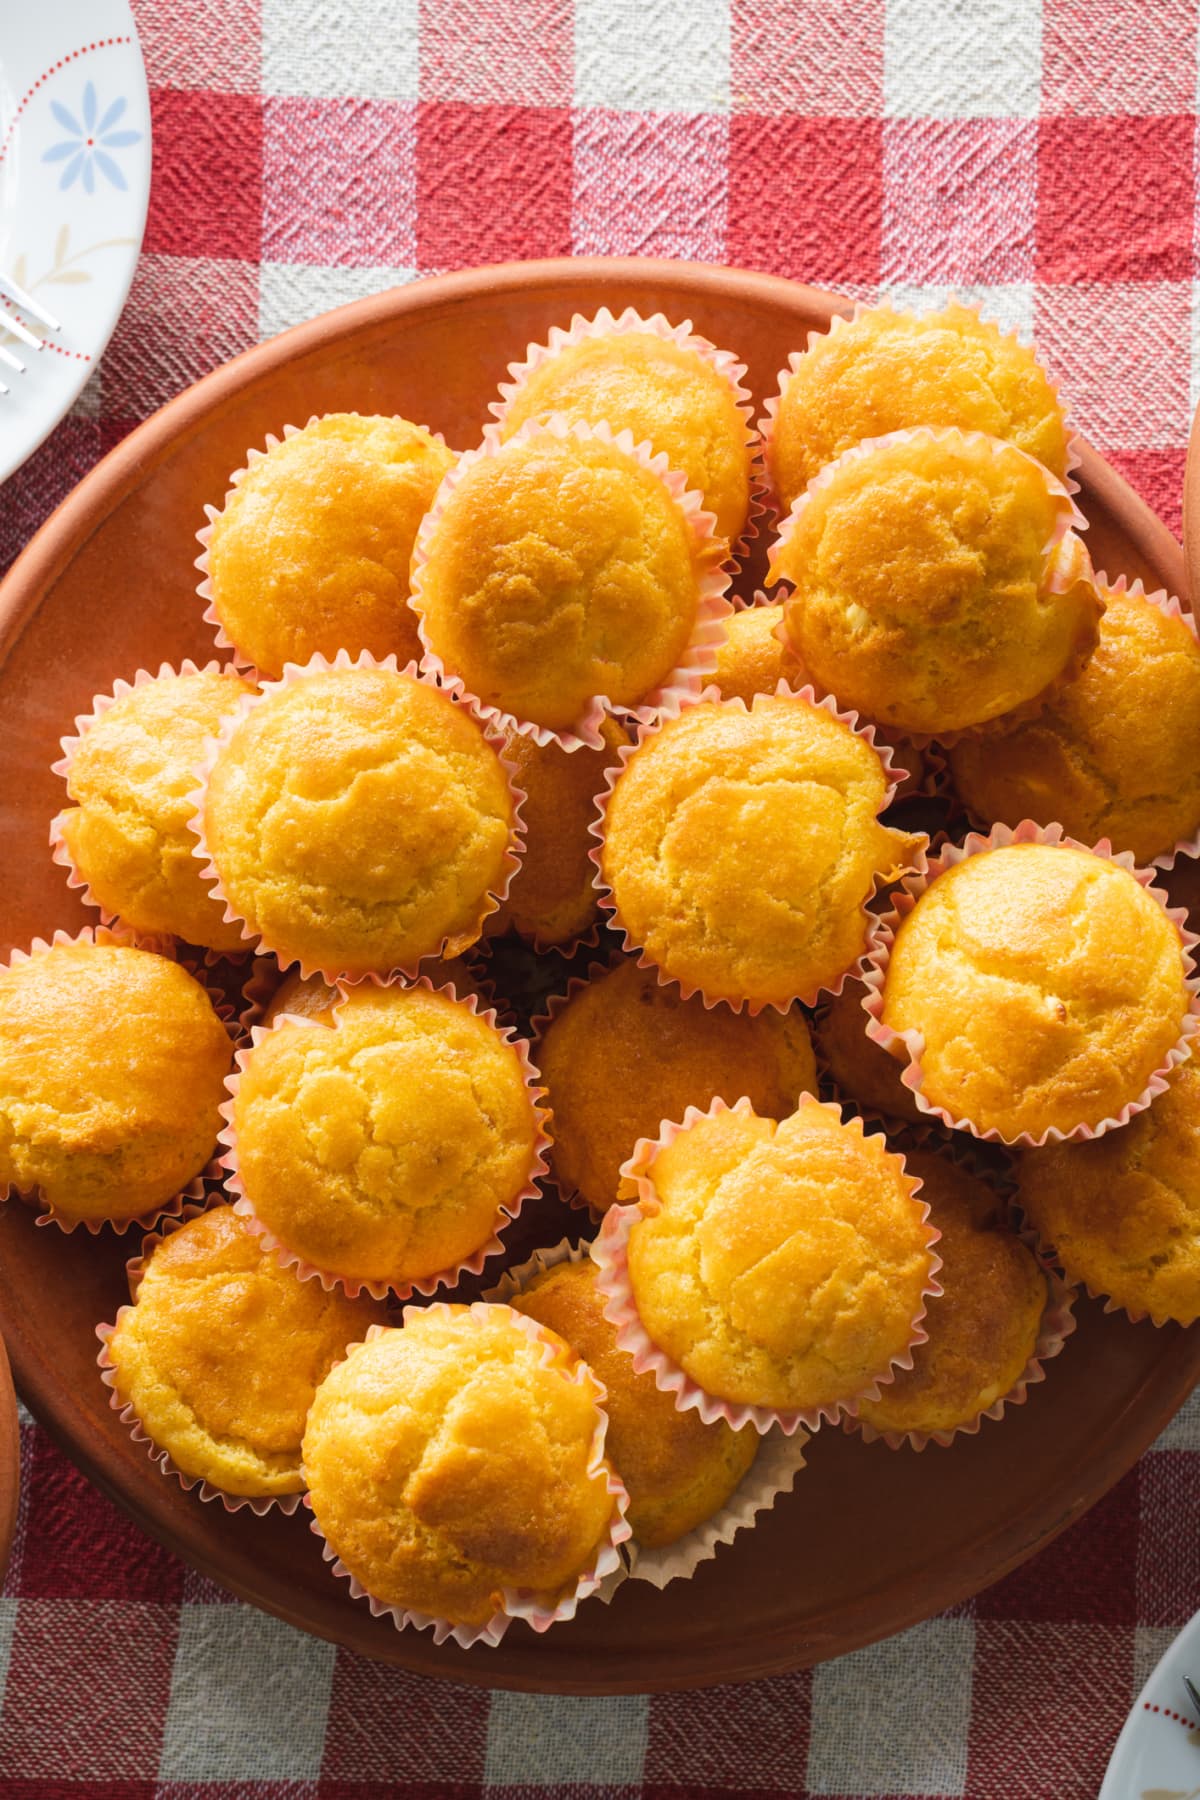 Corn pone muffins on a plate on the table fresh baked and ready to eat